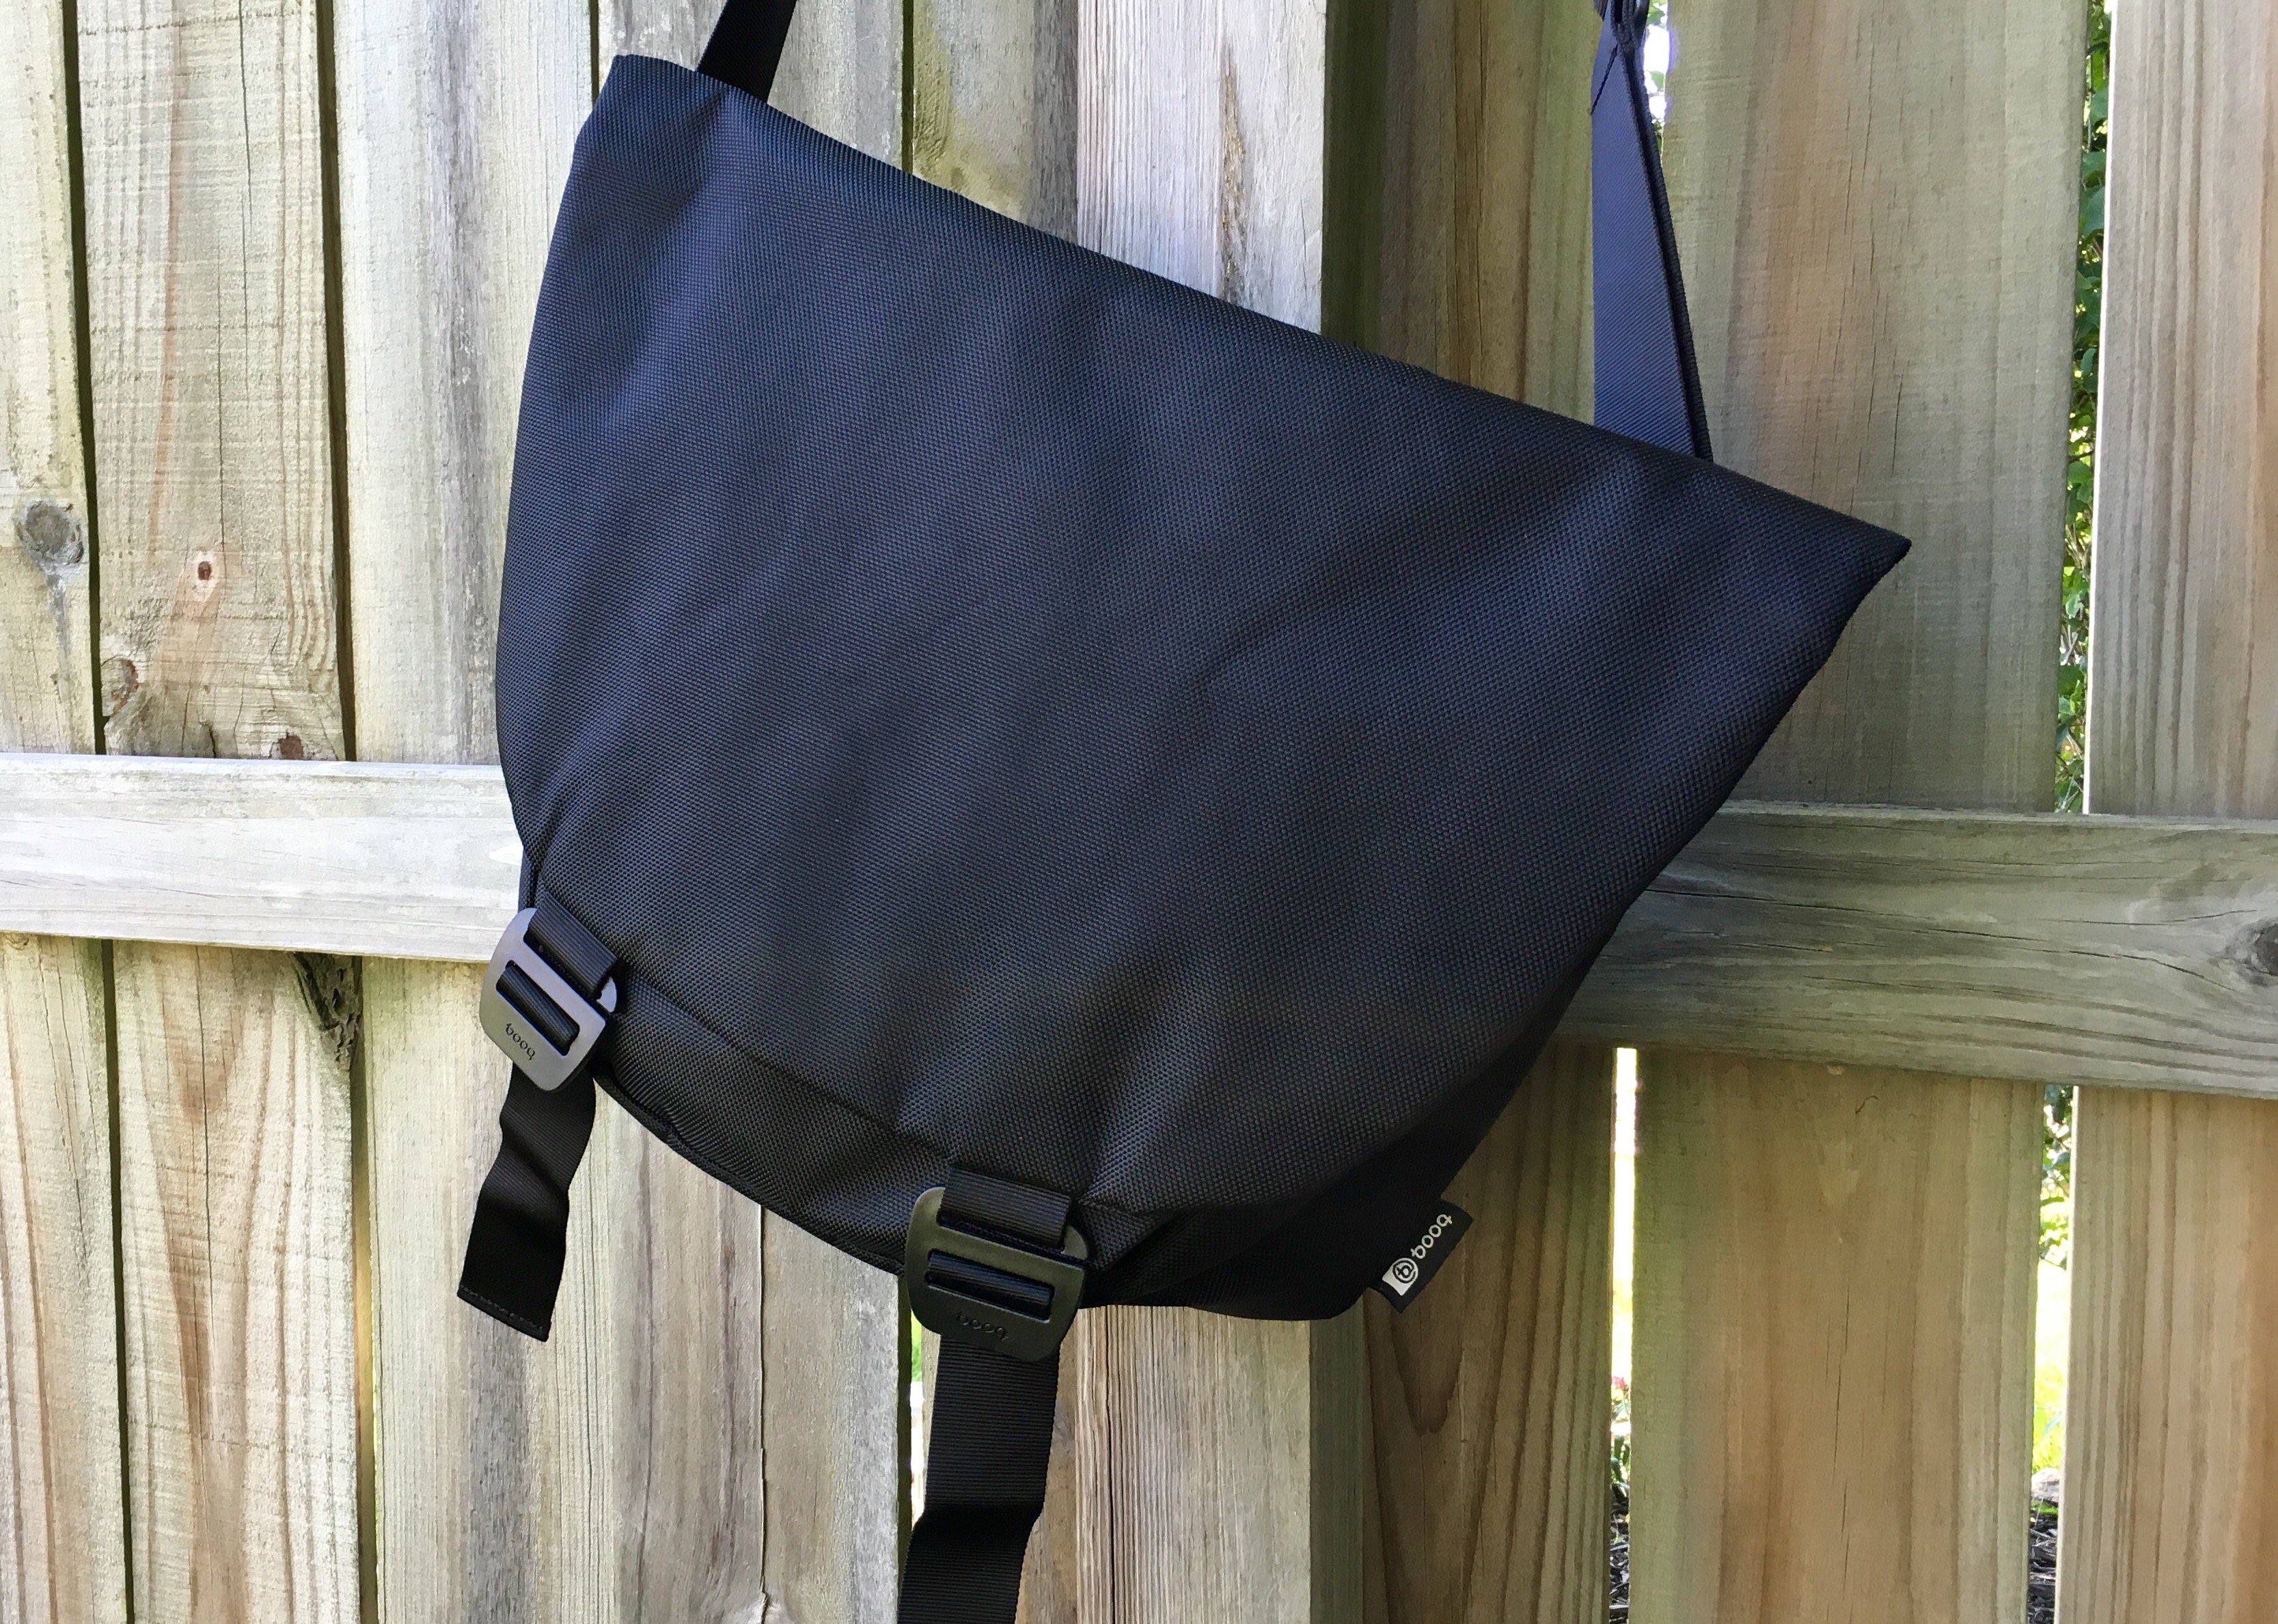 The Booq Shadow is an excellent messenger bag.